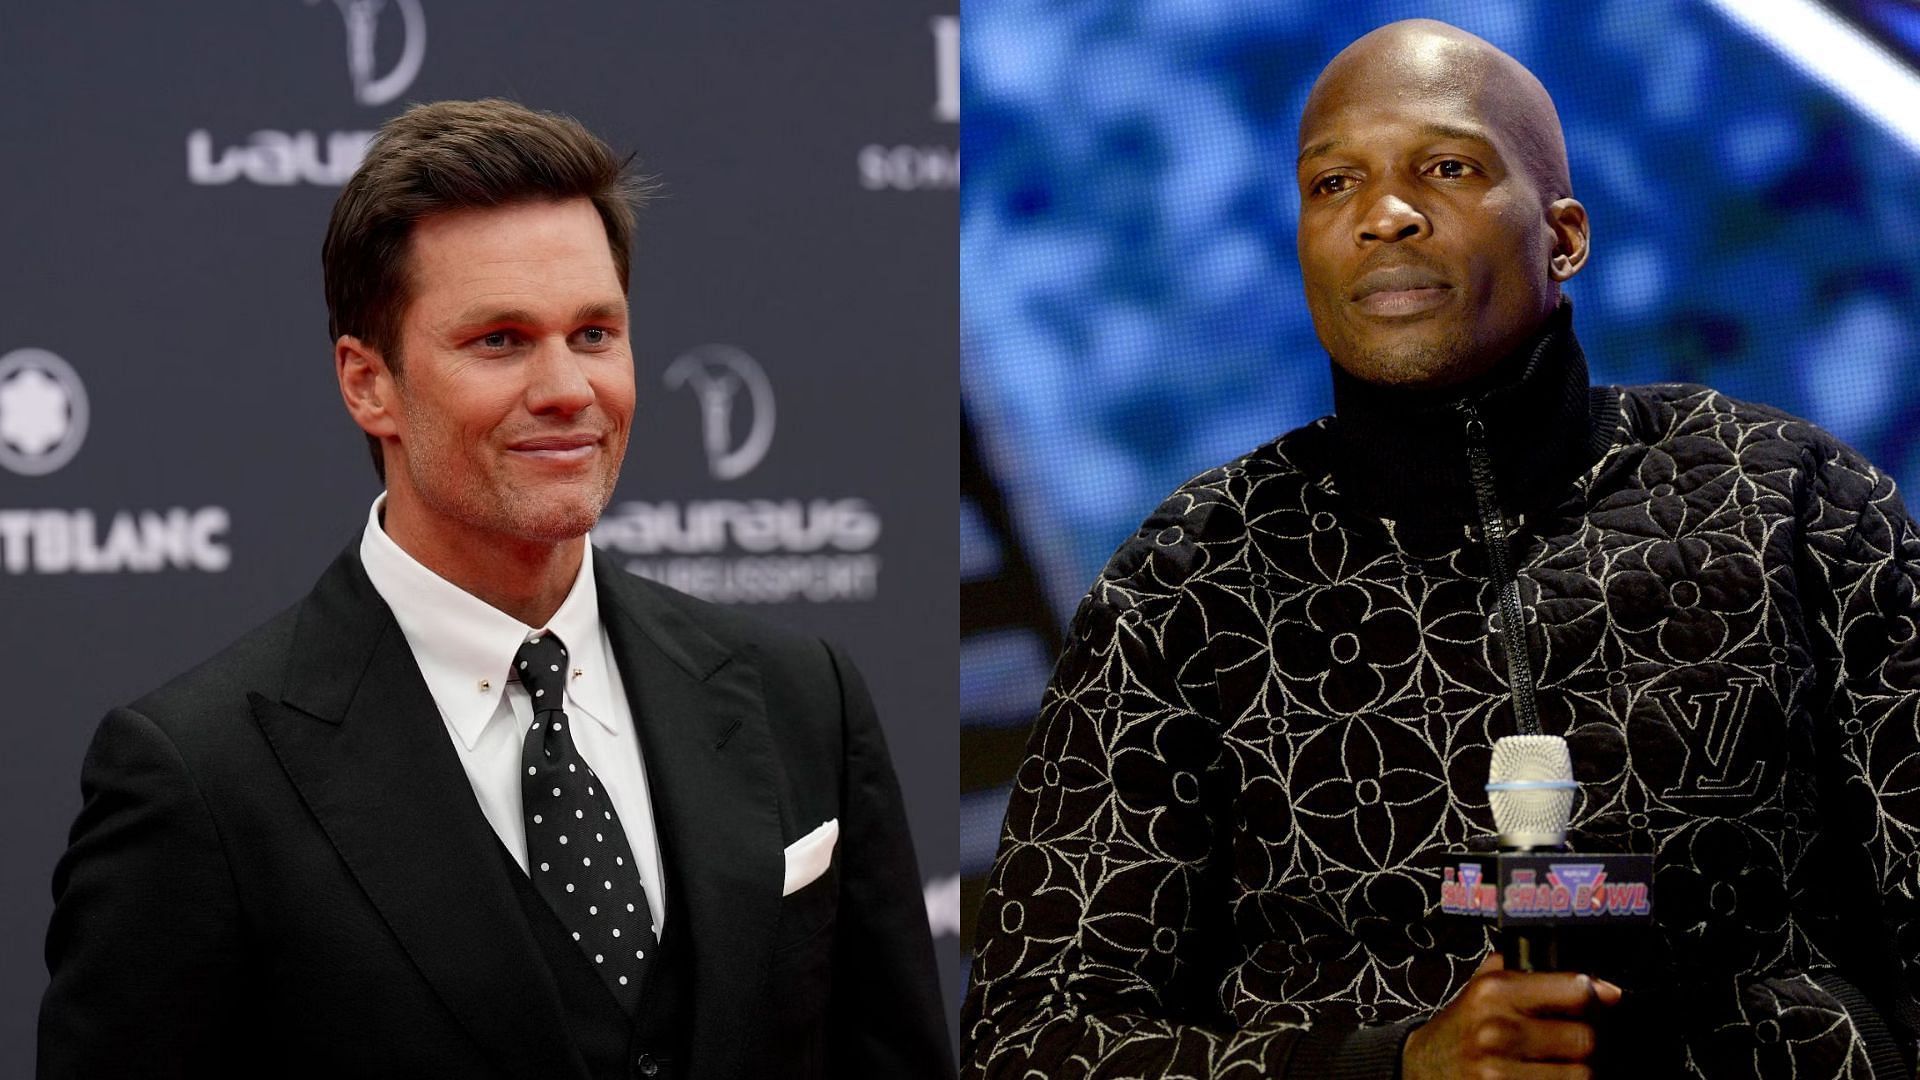 Chad Johnson has some doubts over Tom Brady